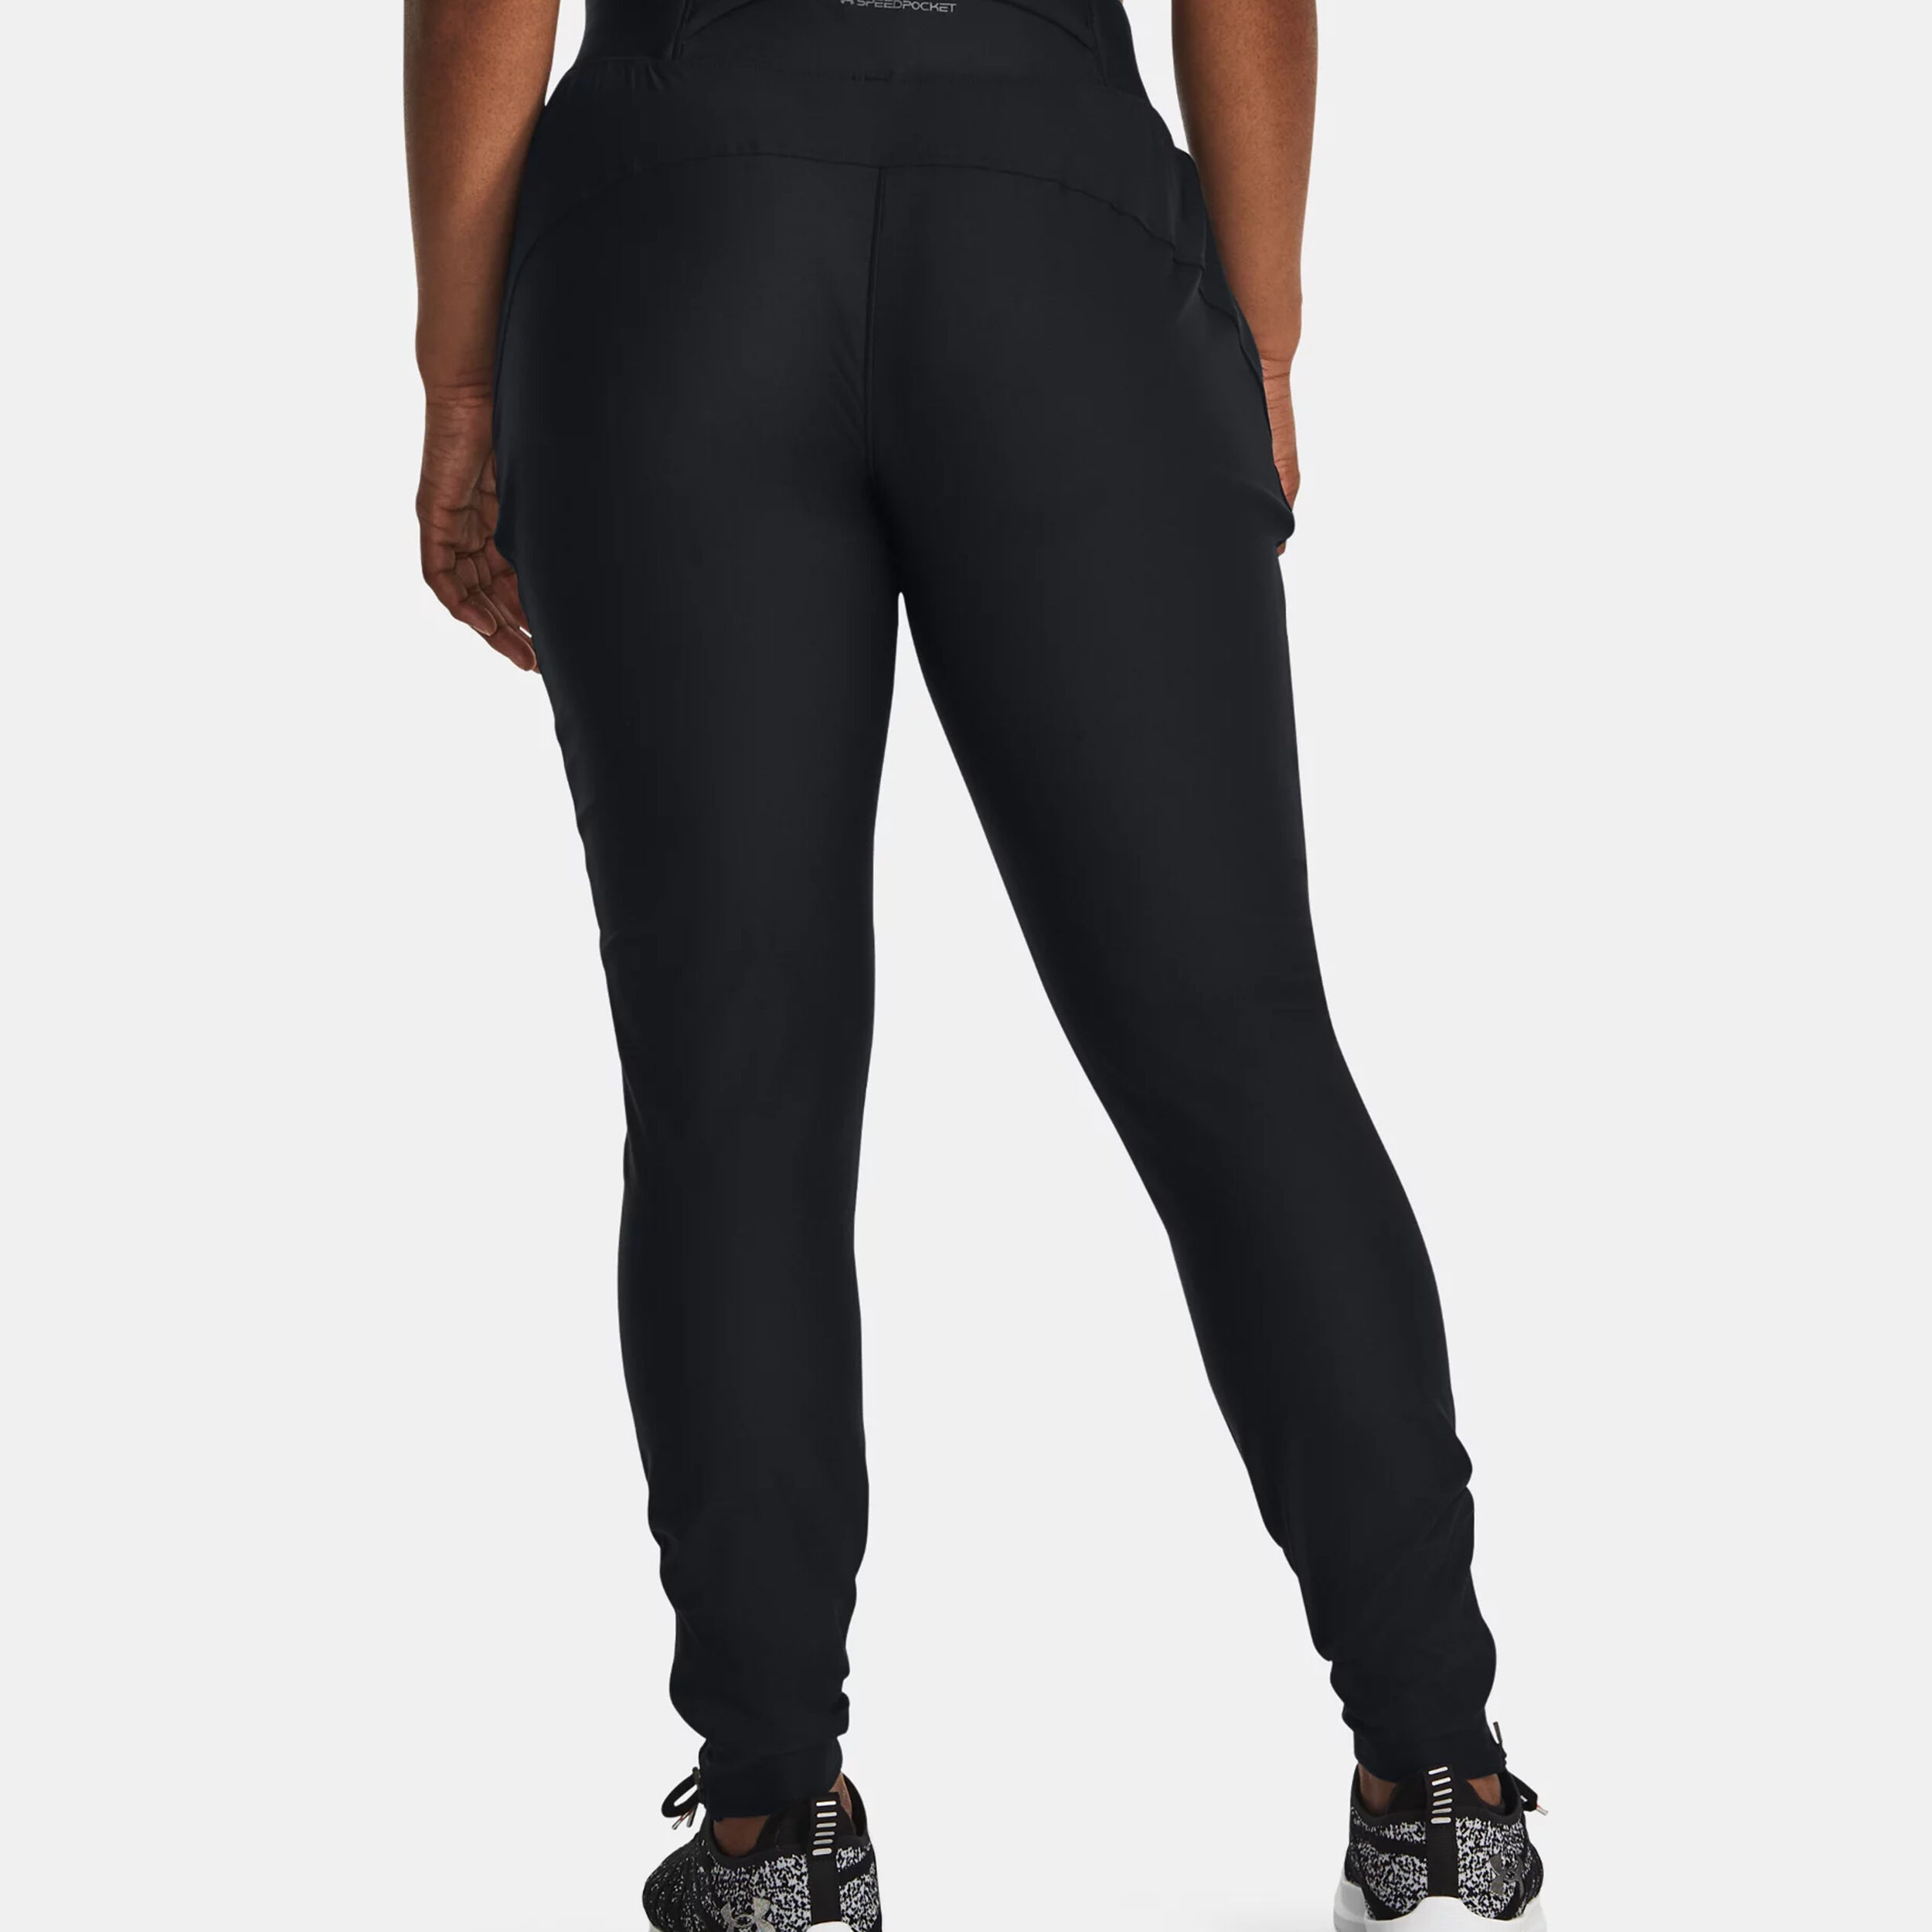 9 Best Leggings With Pockets For Exercising In 2023 | body+soul